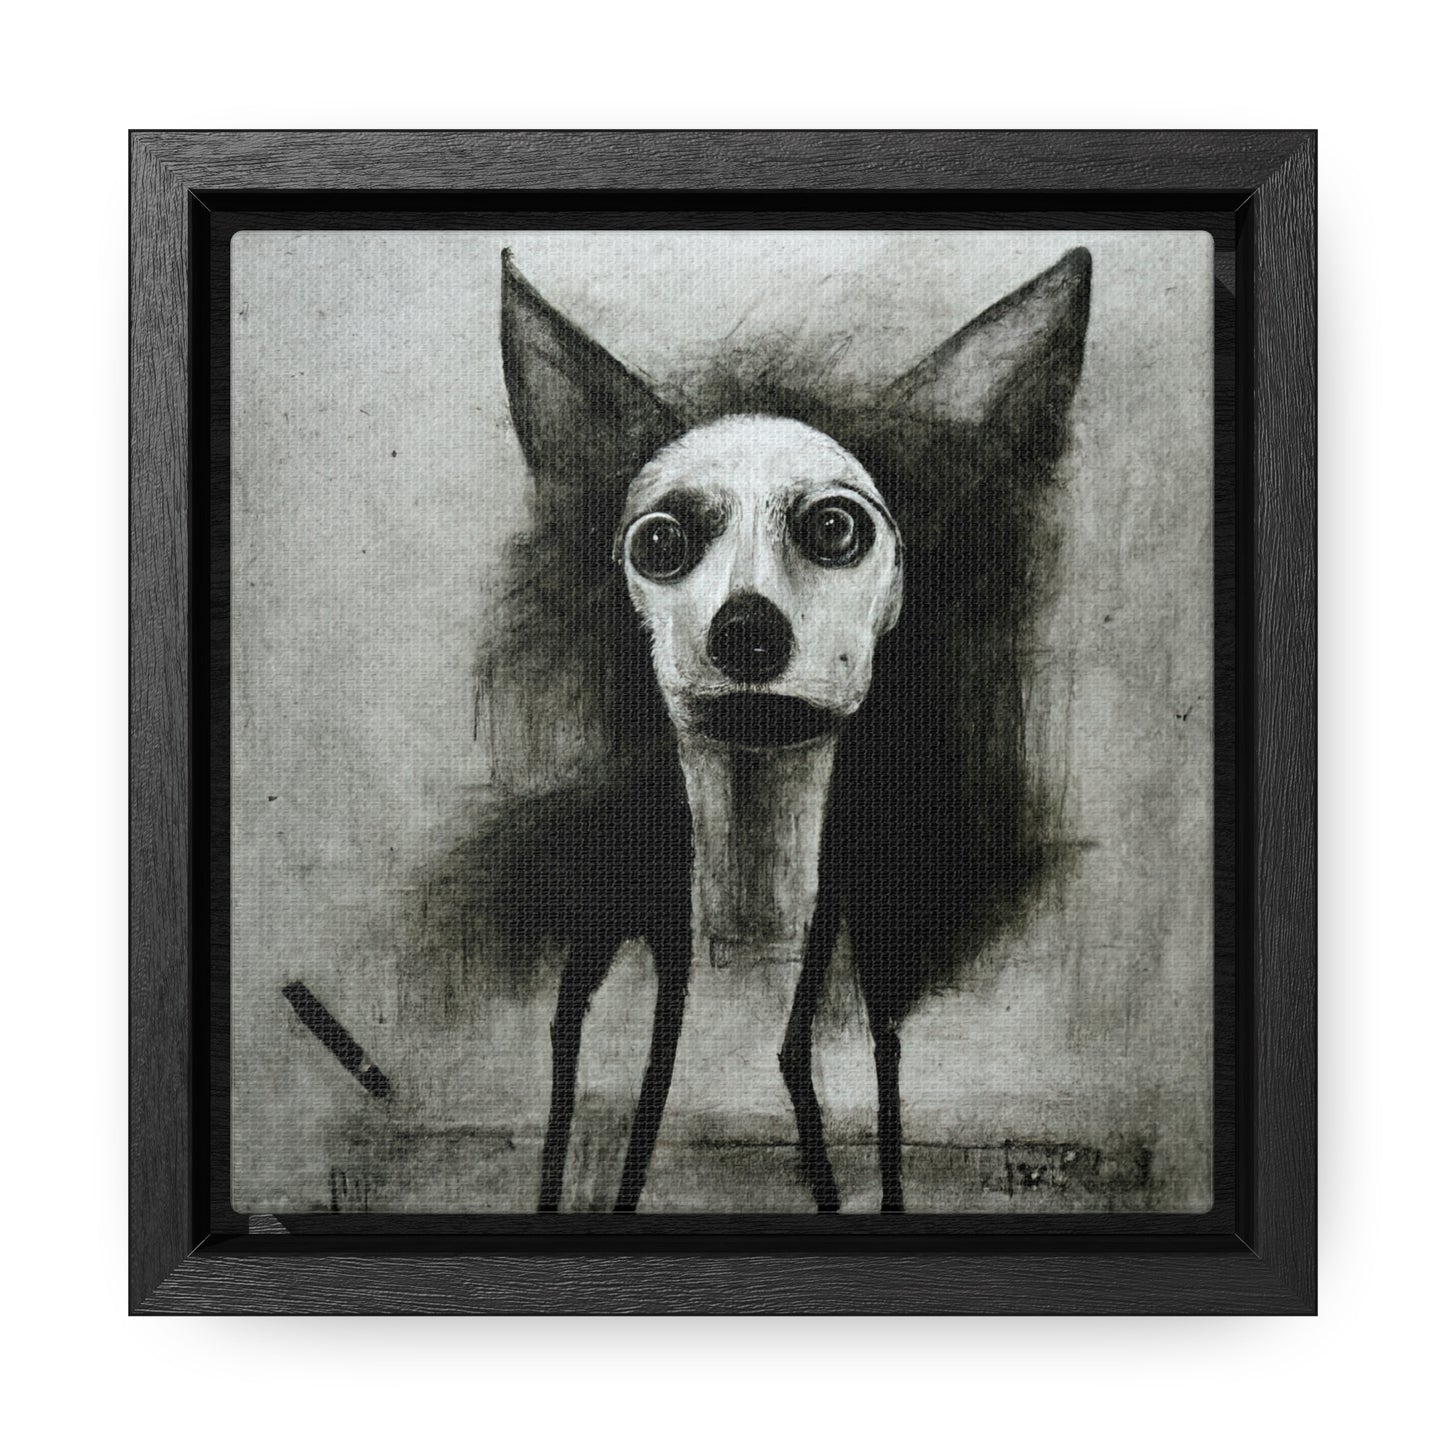 Dogs and Puppies 16, Valentinii, Gallery Canvas Wraps, Square Frame